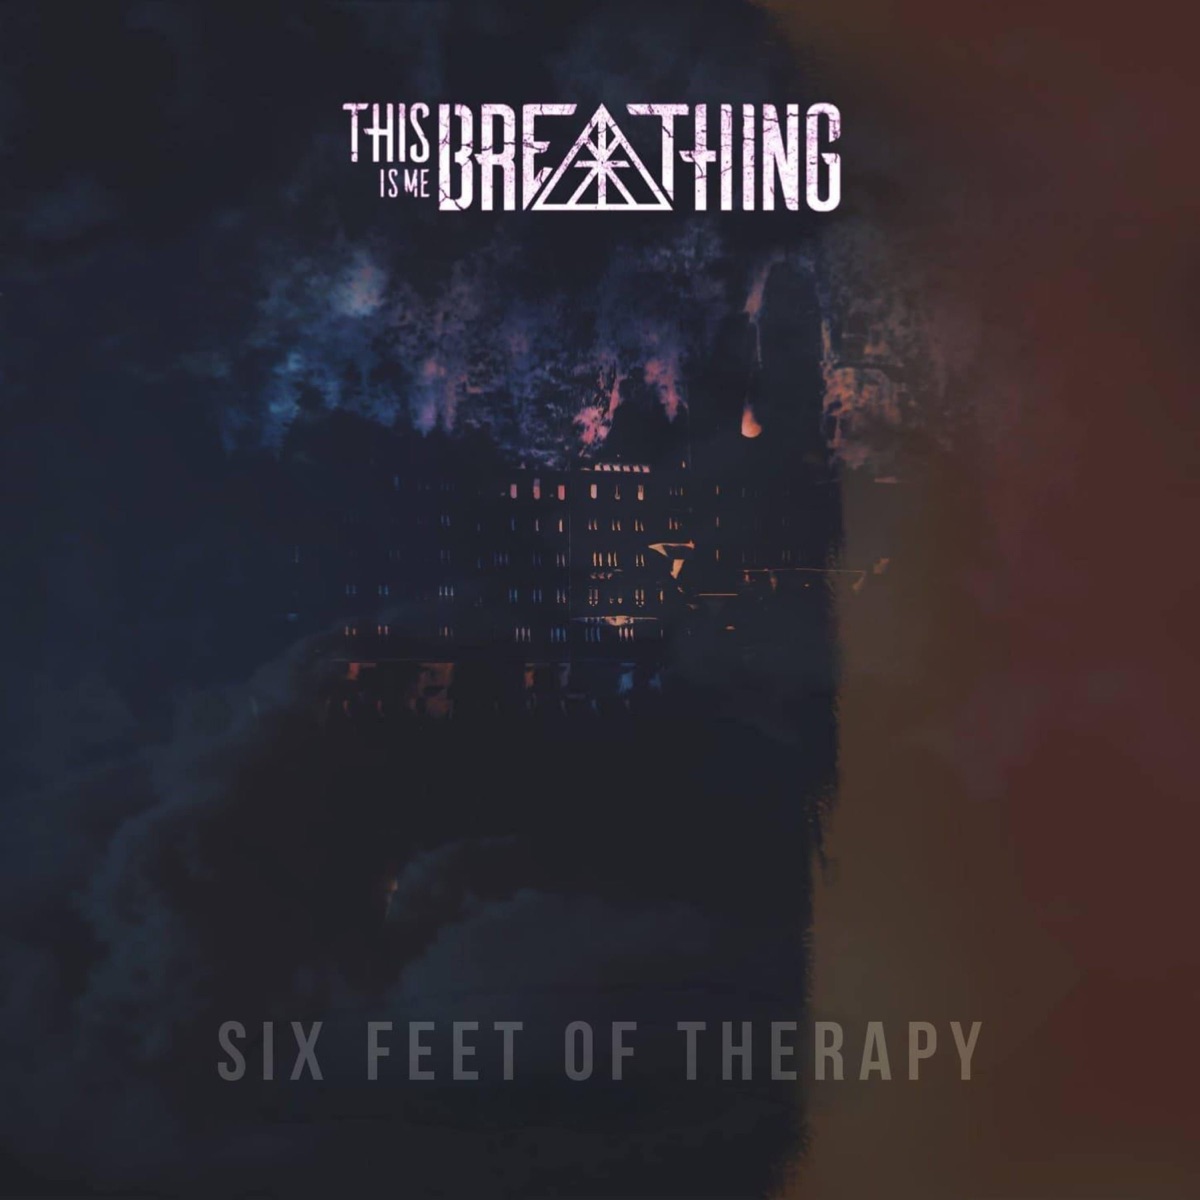 Persona - Single - Album by This Is Me Breathing - Apple Music